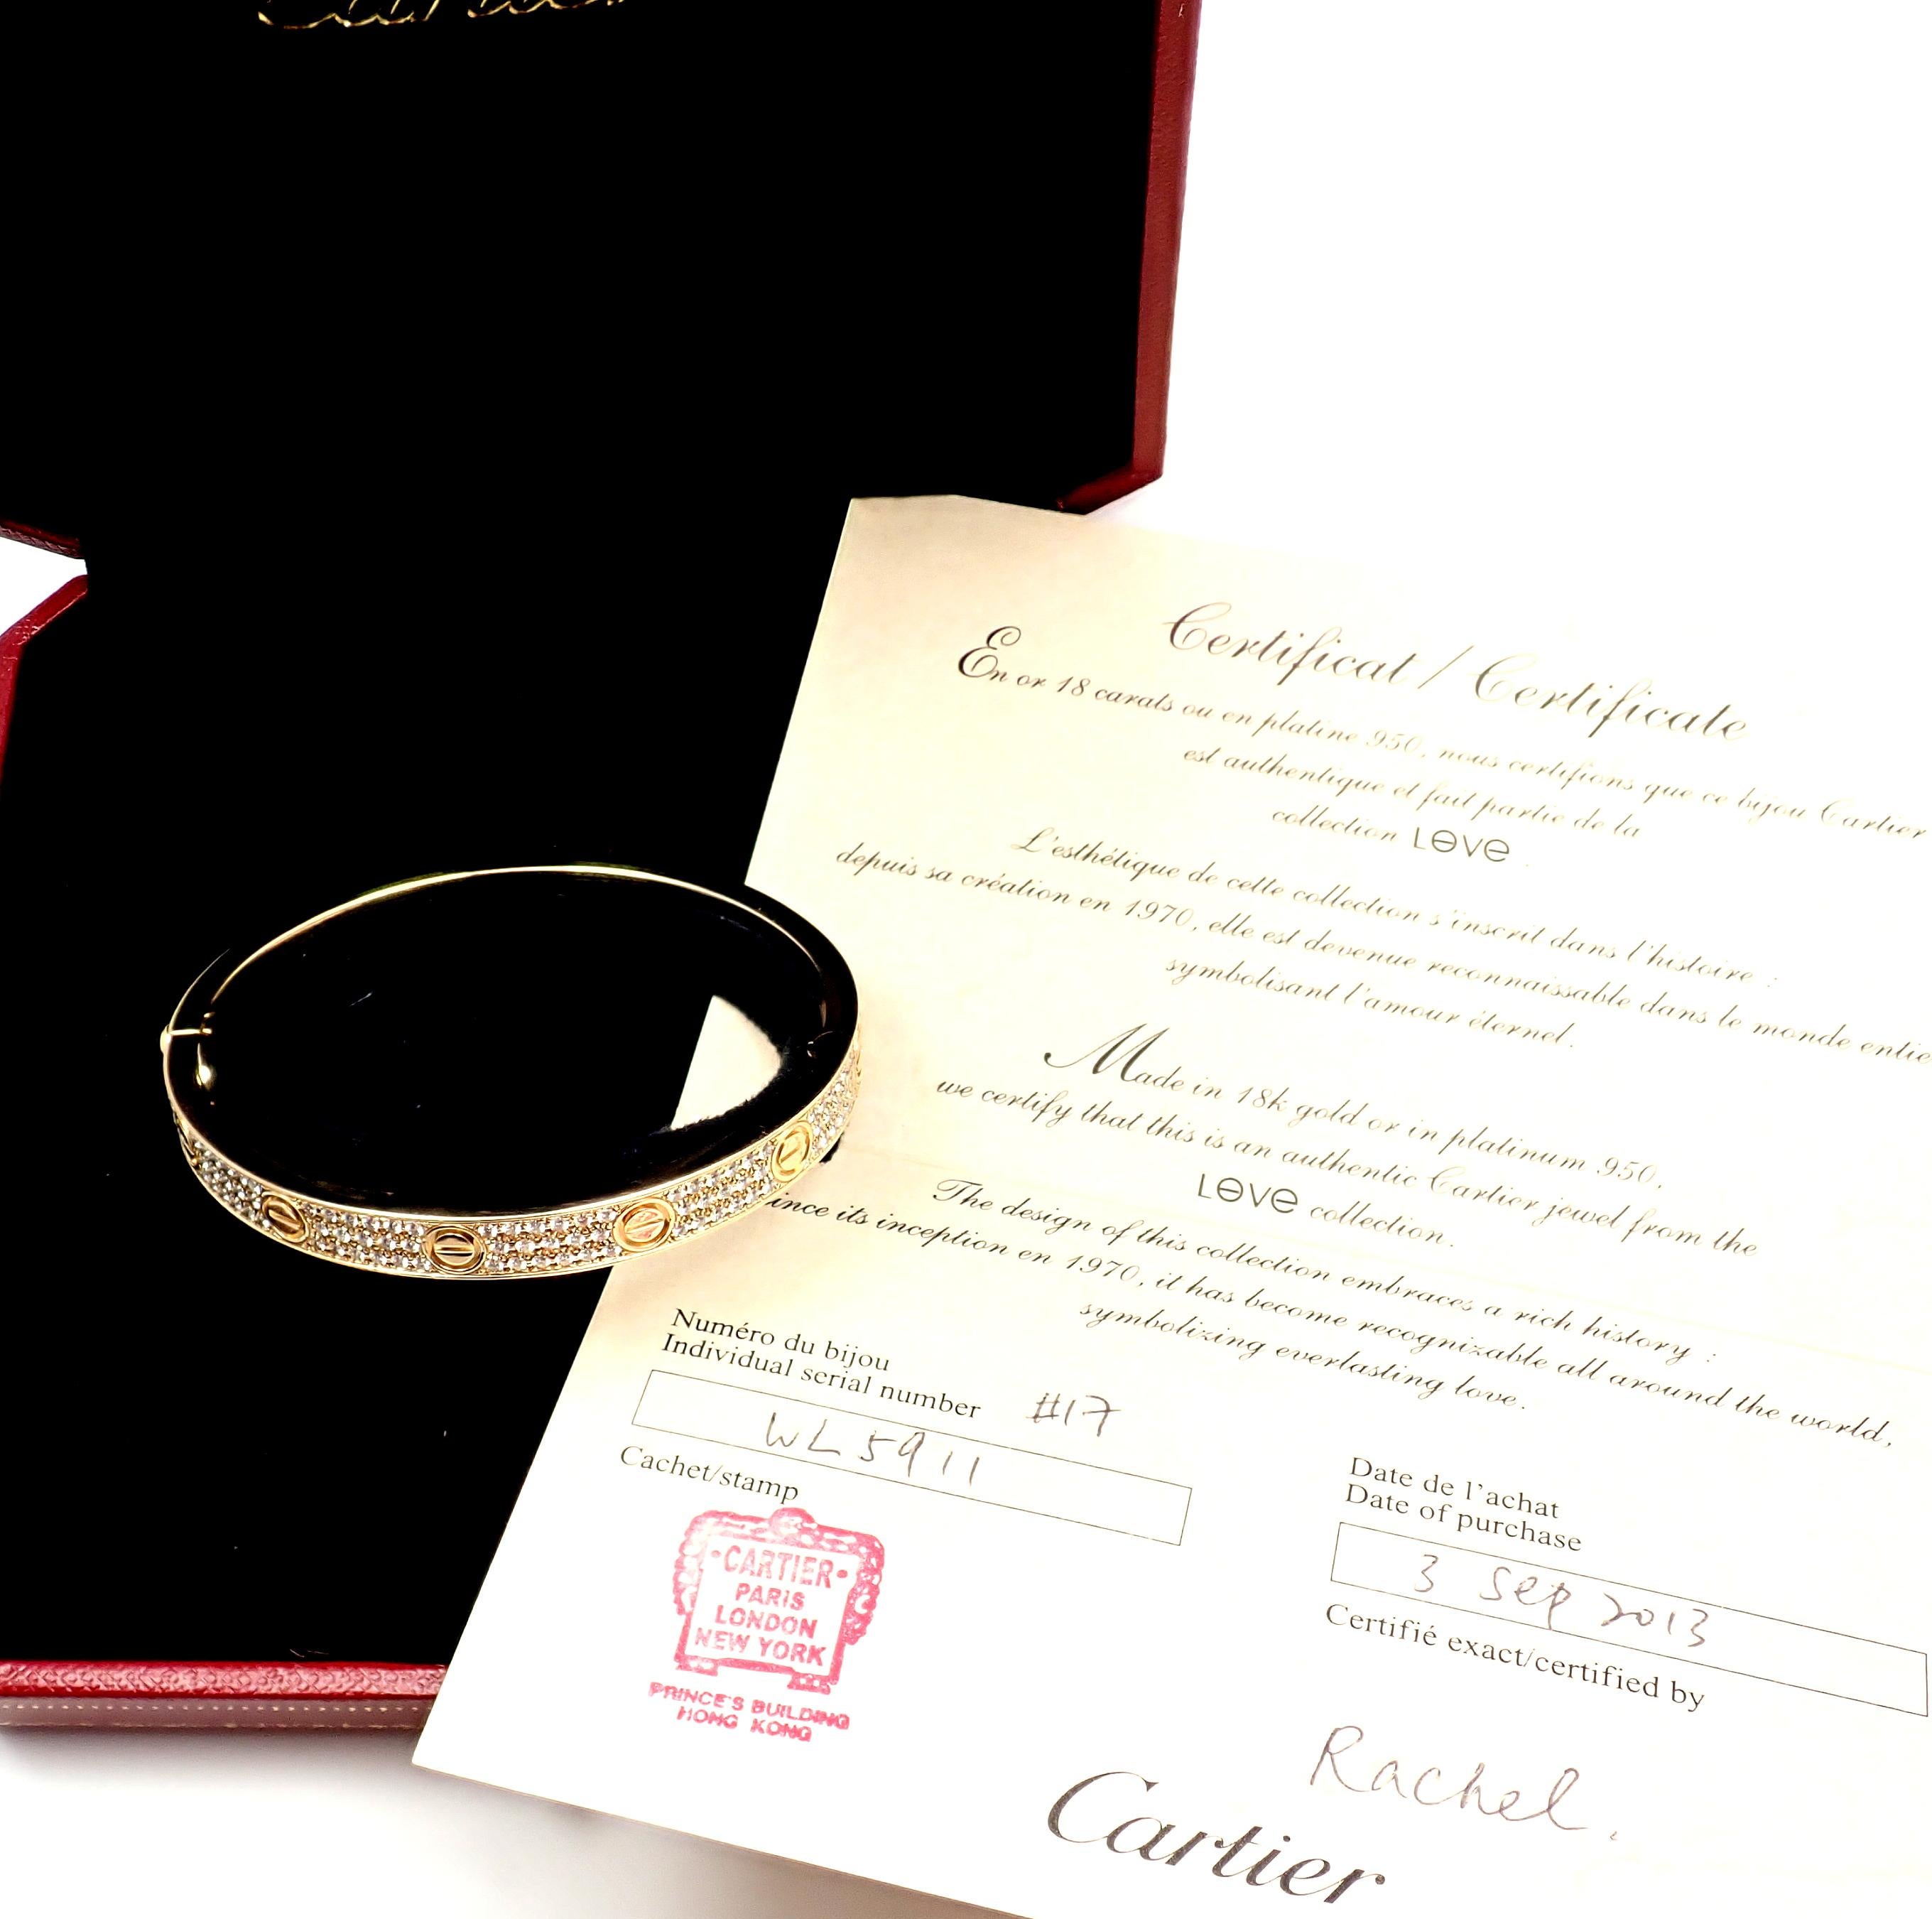 18k Yellow Gold Diamond Paved LOVE Bangle Bracelet by Cartier. 
SIZE 17. 
With 204 brilliant cut VS1 clarity, E color diamonds totaling 2 carats.
This bracelet comes with a Cartier box, and Cartier certificate.
Details: 
Size: 17
Weight: 47.3